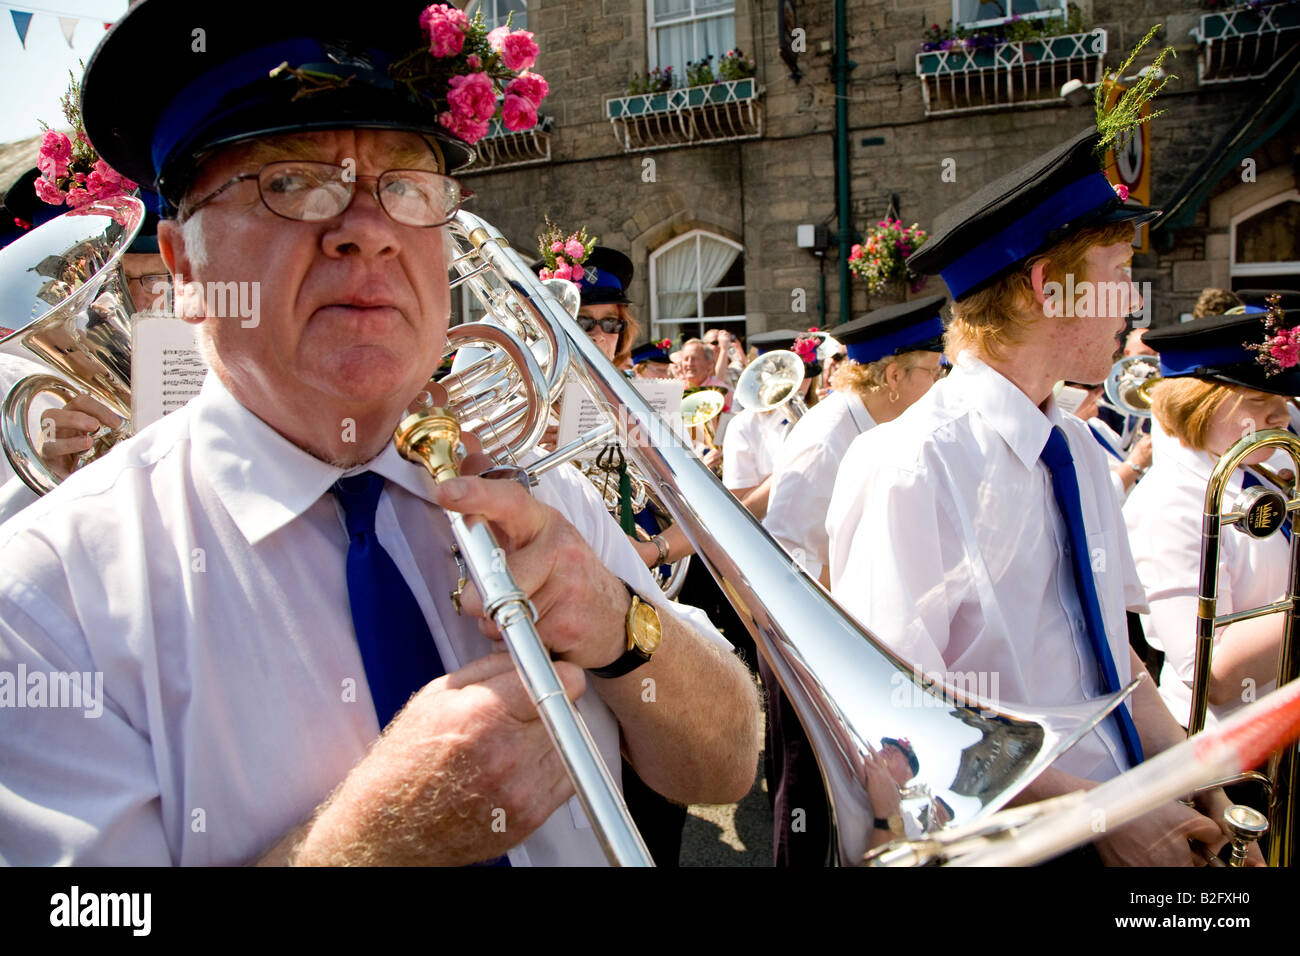 Man Playing Trombone In The Marching Brass Band During The Langholm Common Riding Langholm Scotland UK Stock Photo